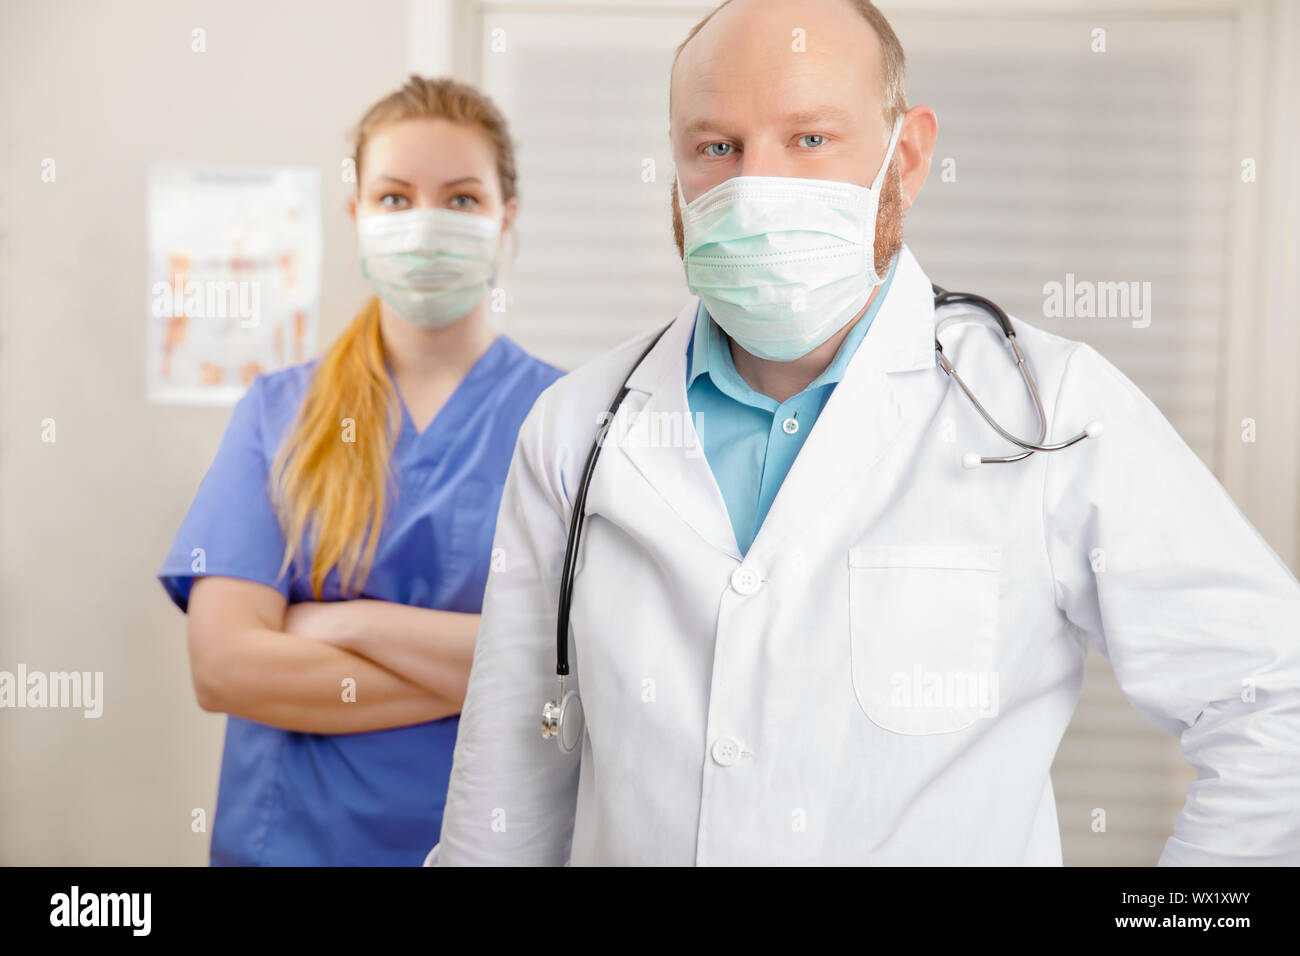 Portrait Of Nurse And Doctor In Hospital Stock Photo